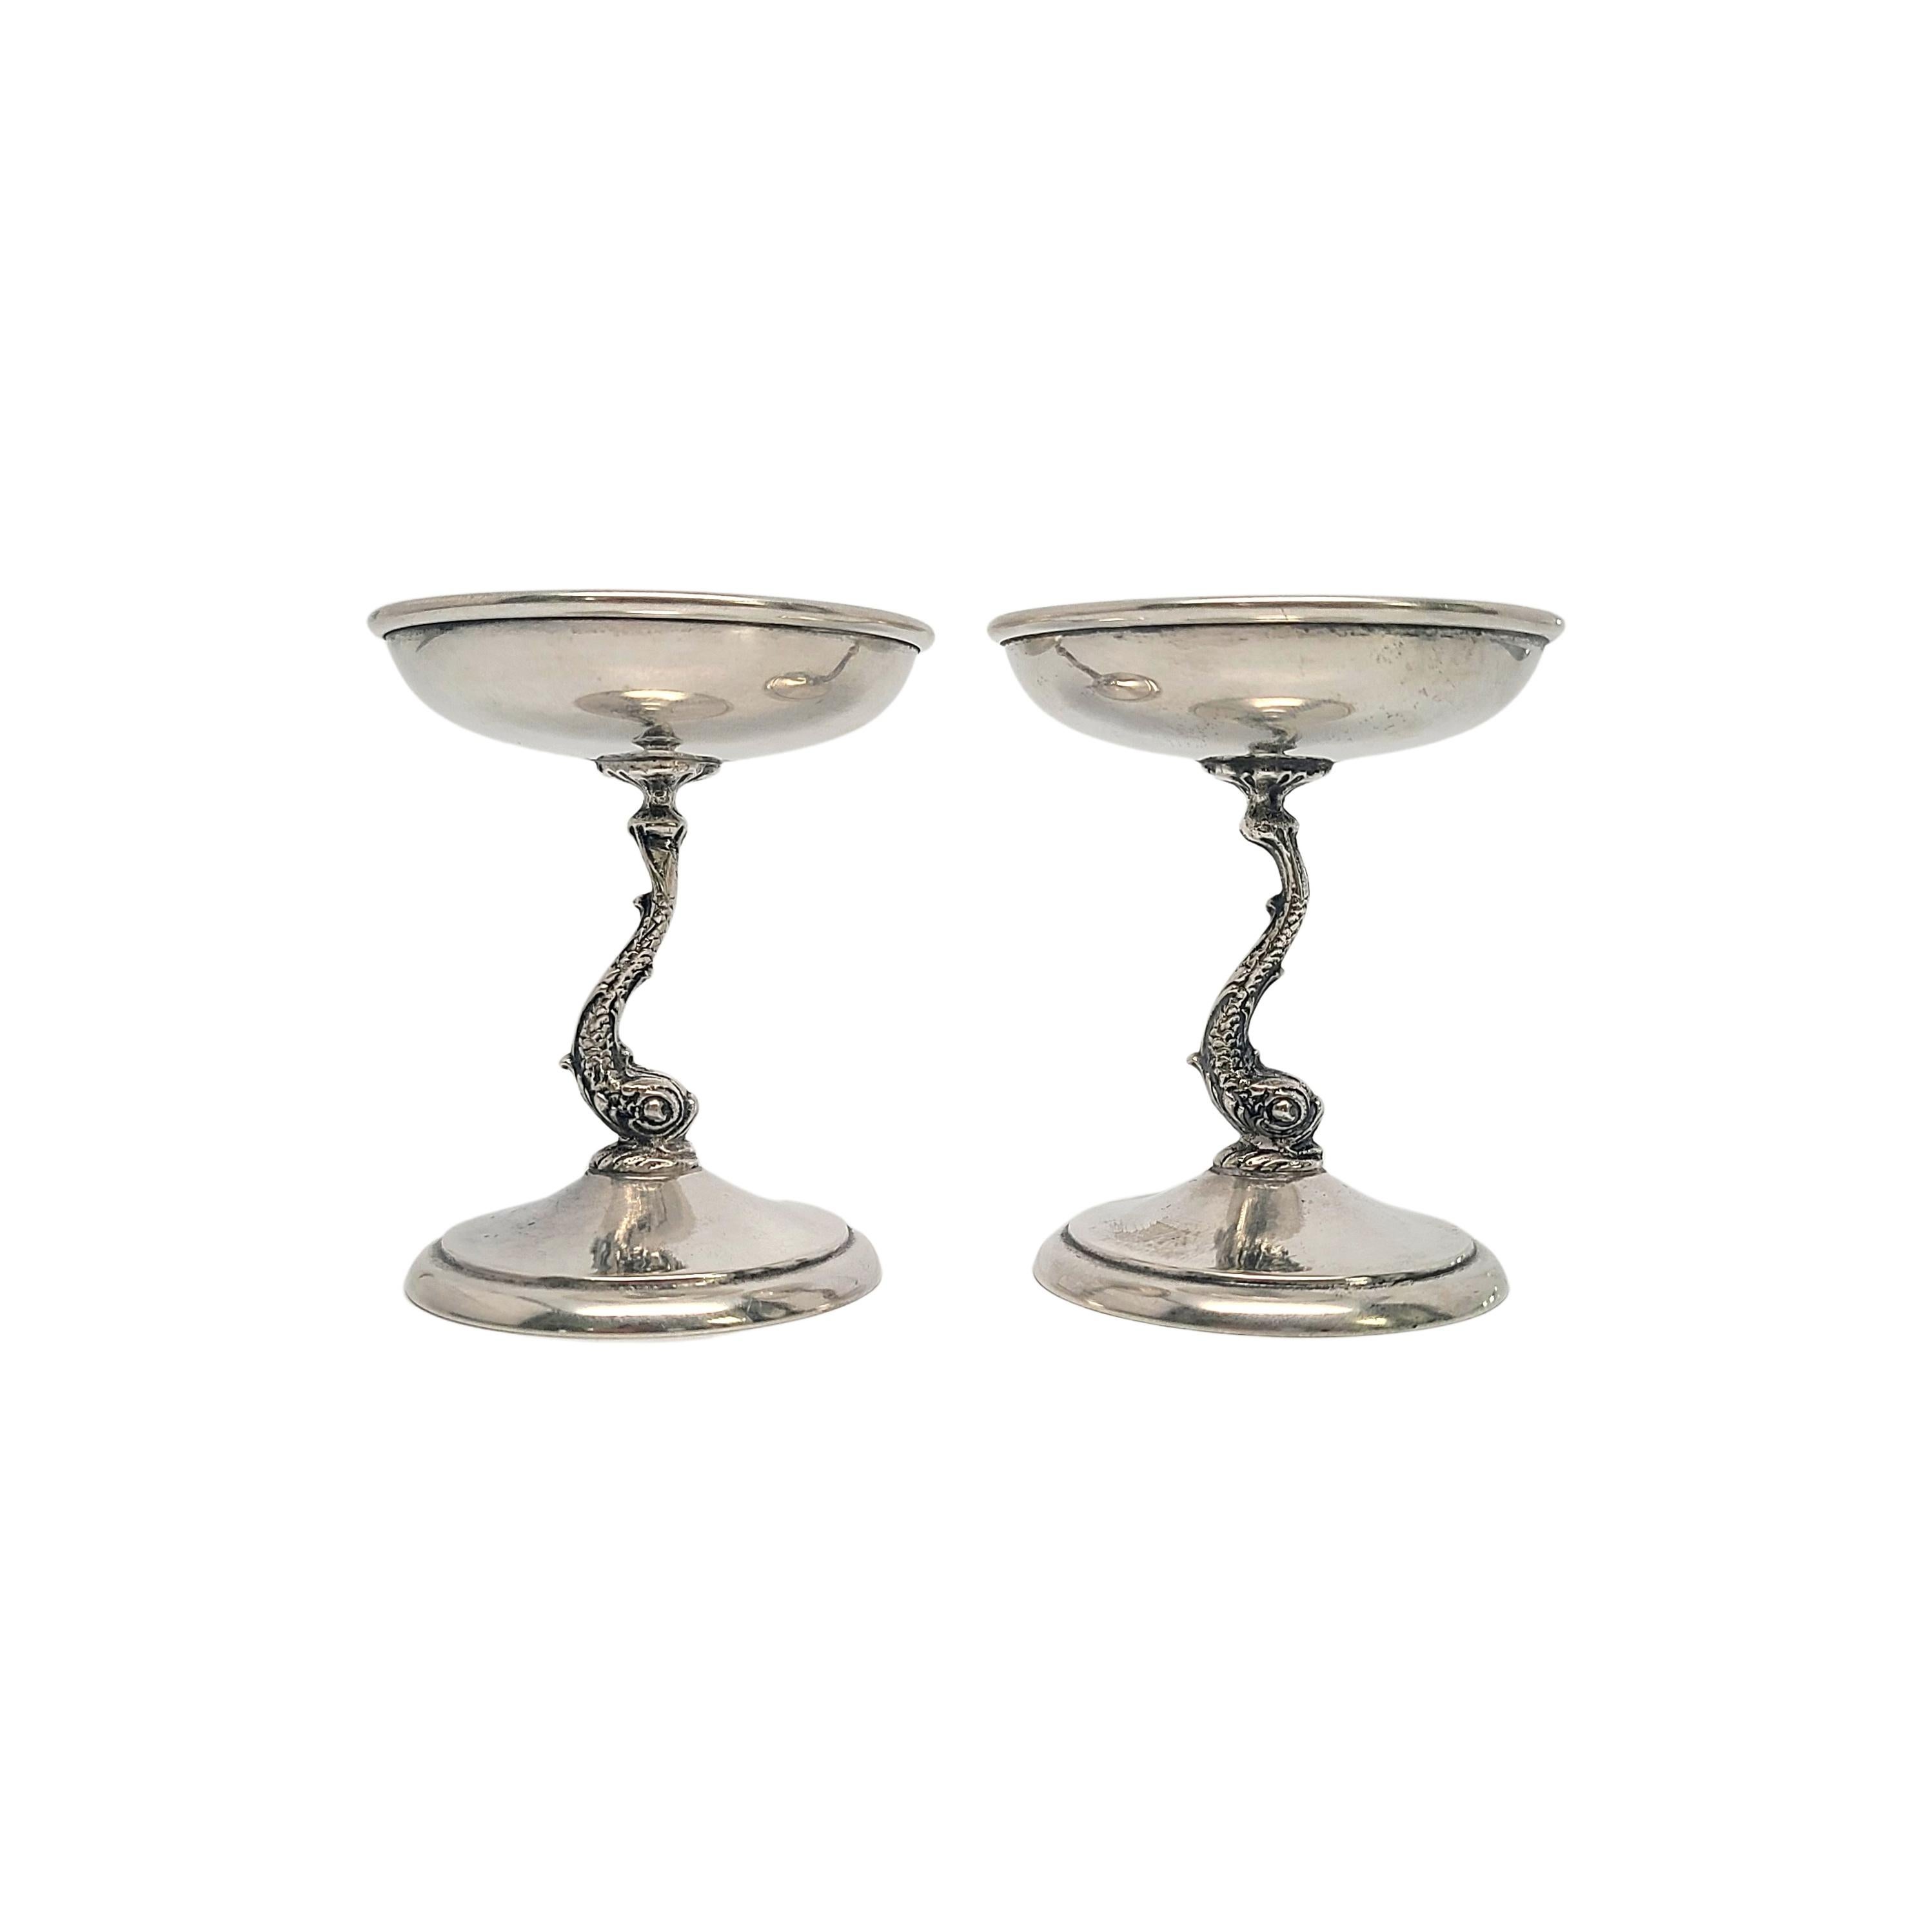 Set of 2 sterling silver fish stem bowls.

Small footed bowls with figural fish stems. Can also be used to hold small votive candles.

Measures approx 3 1/8